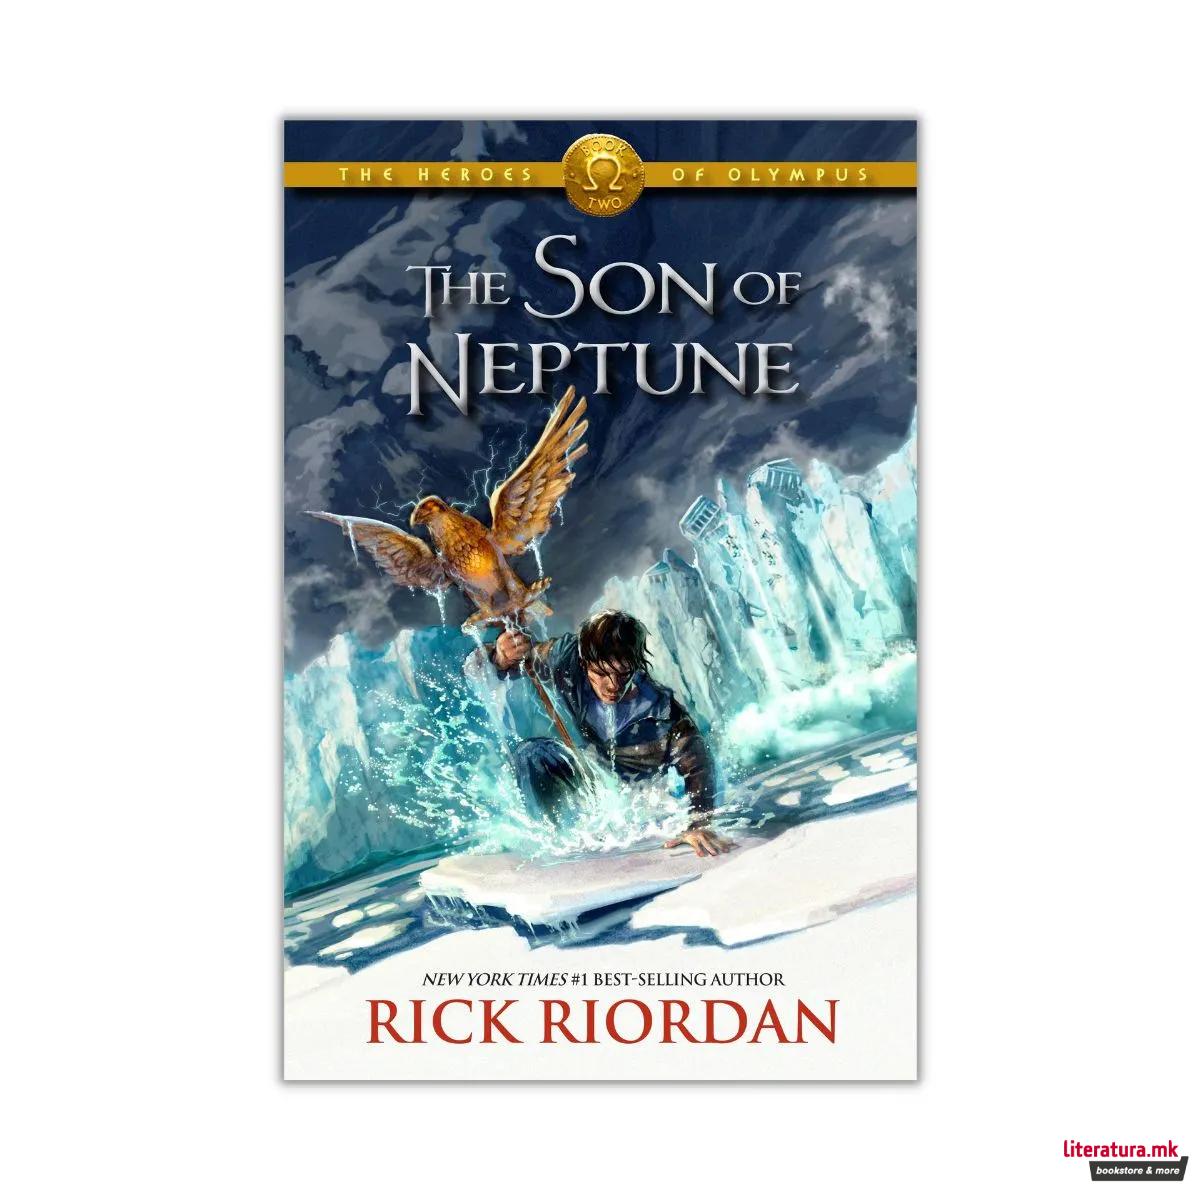 The Son of Neptune (The Heroes of Olympus Book 2) 